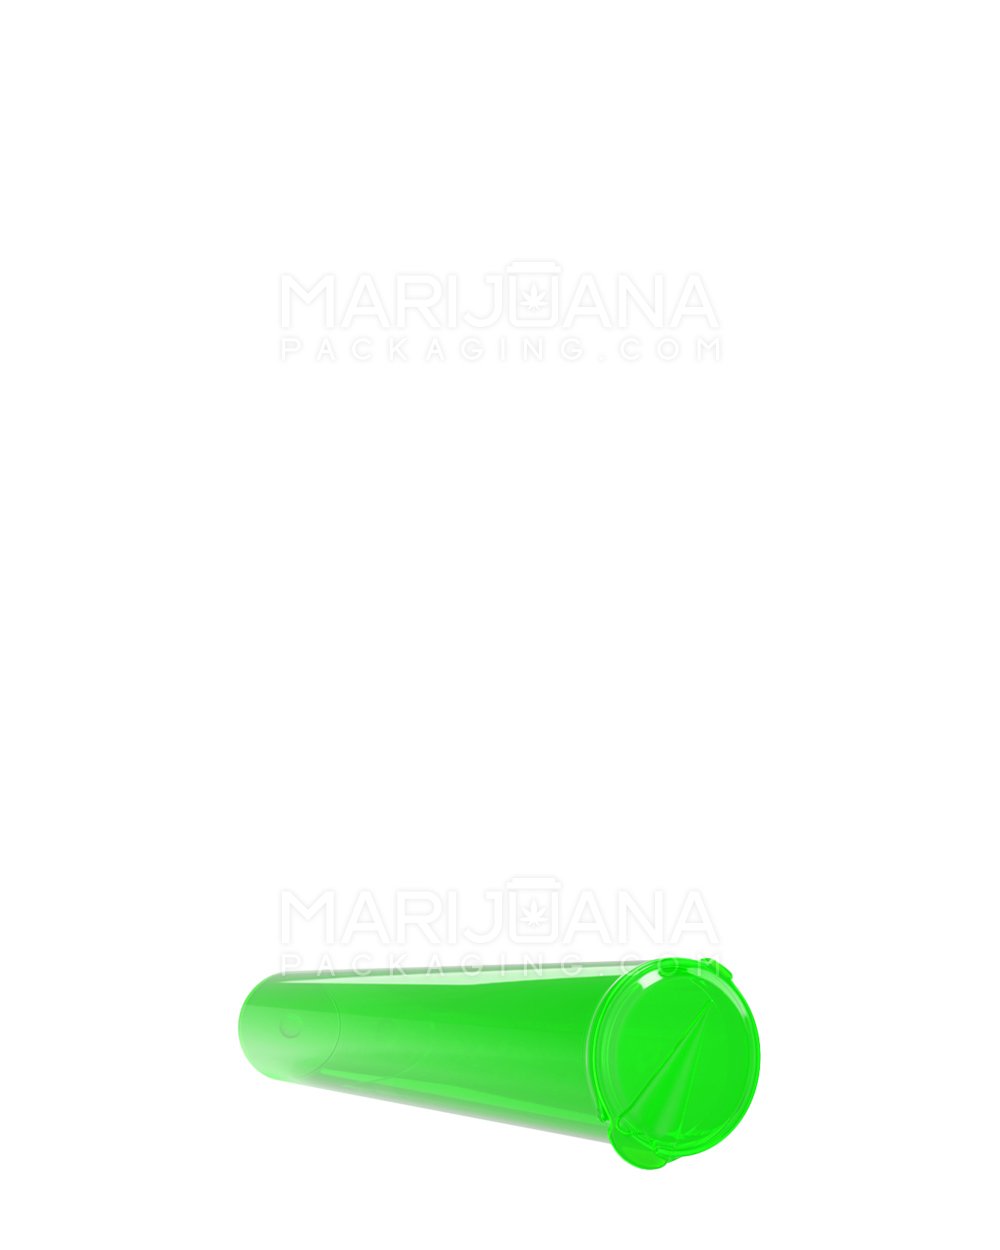 King Size Pop Top Translucent Plastic Pre-Roll Tubes | 116mm - Green - 100 Count - 5